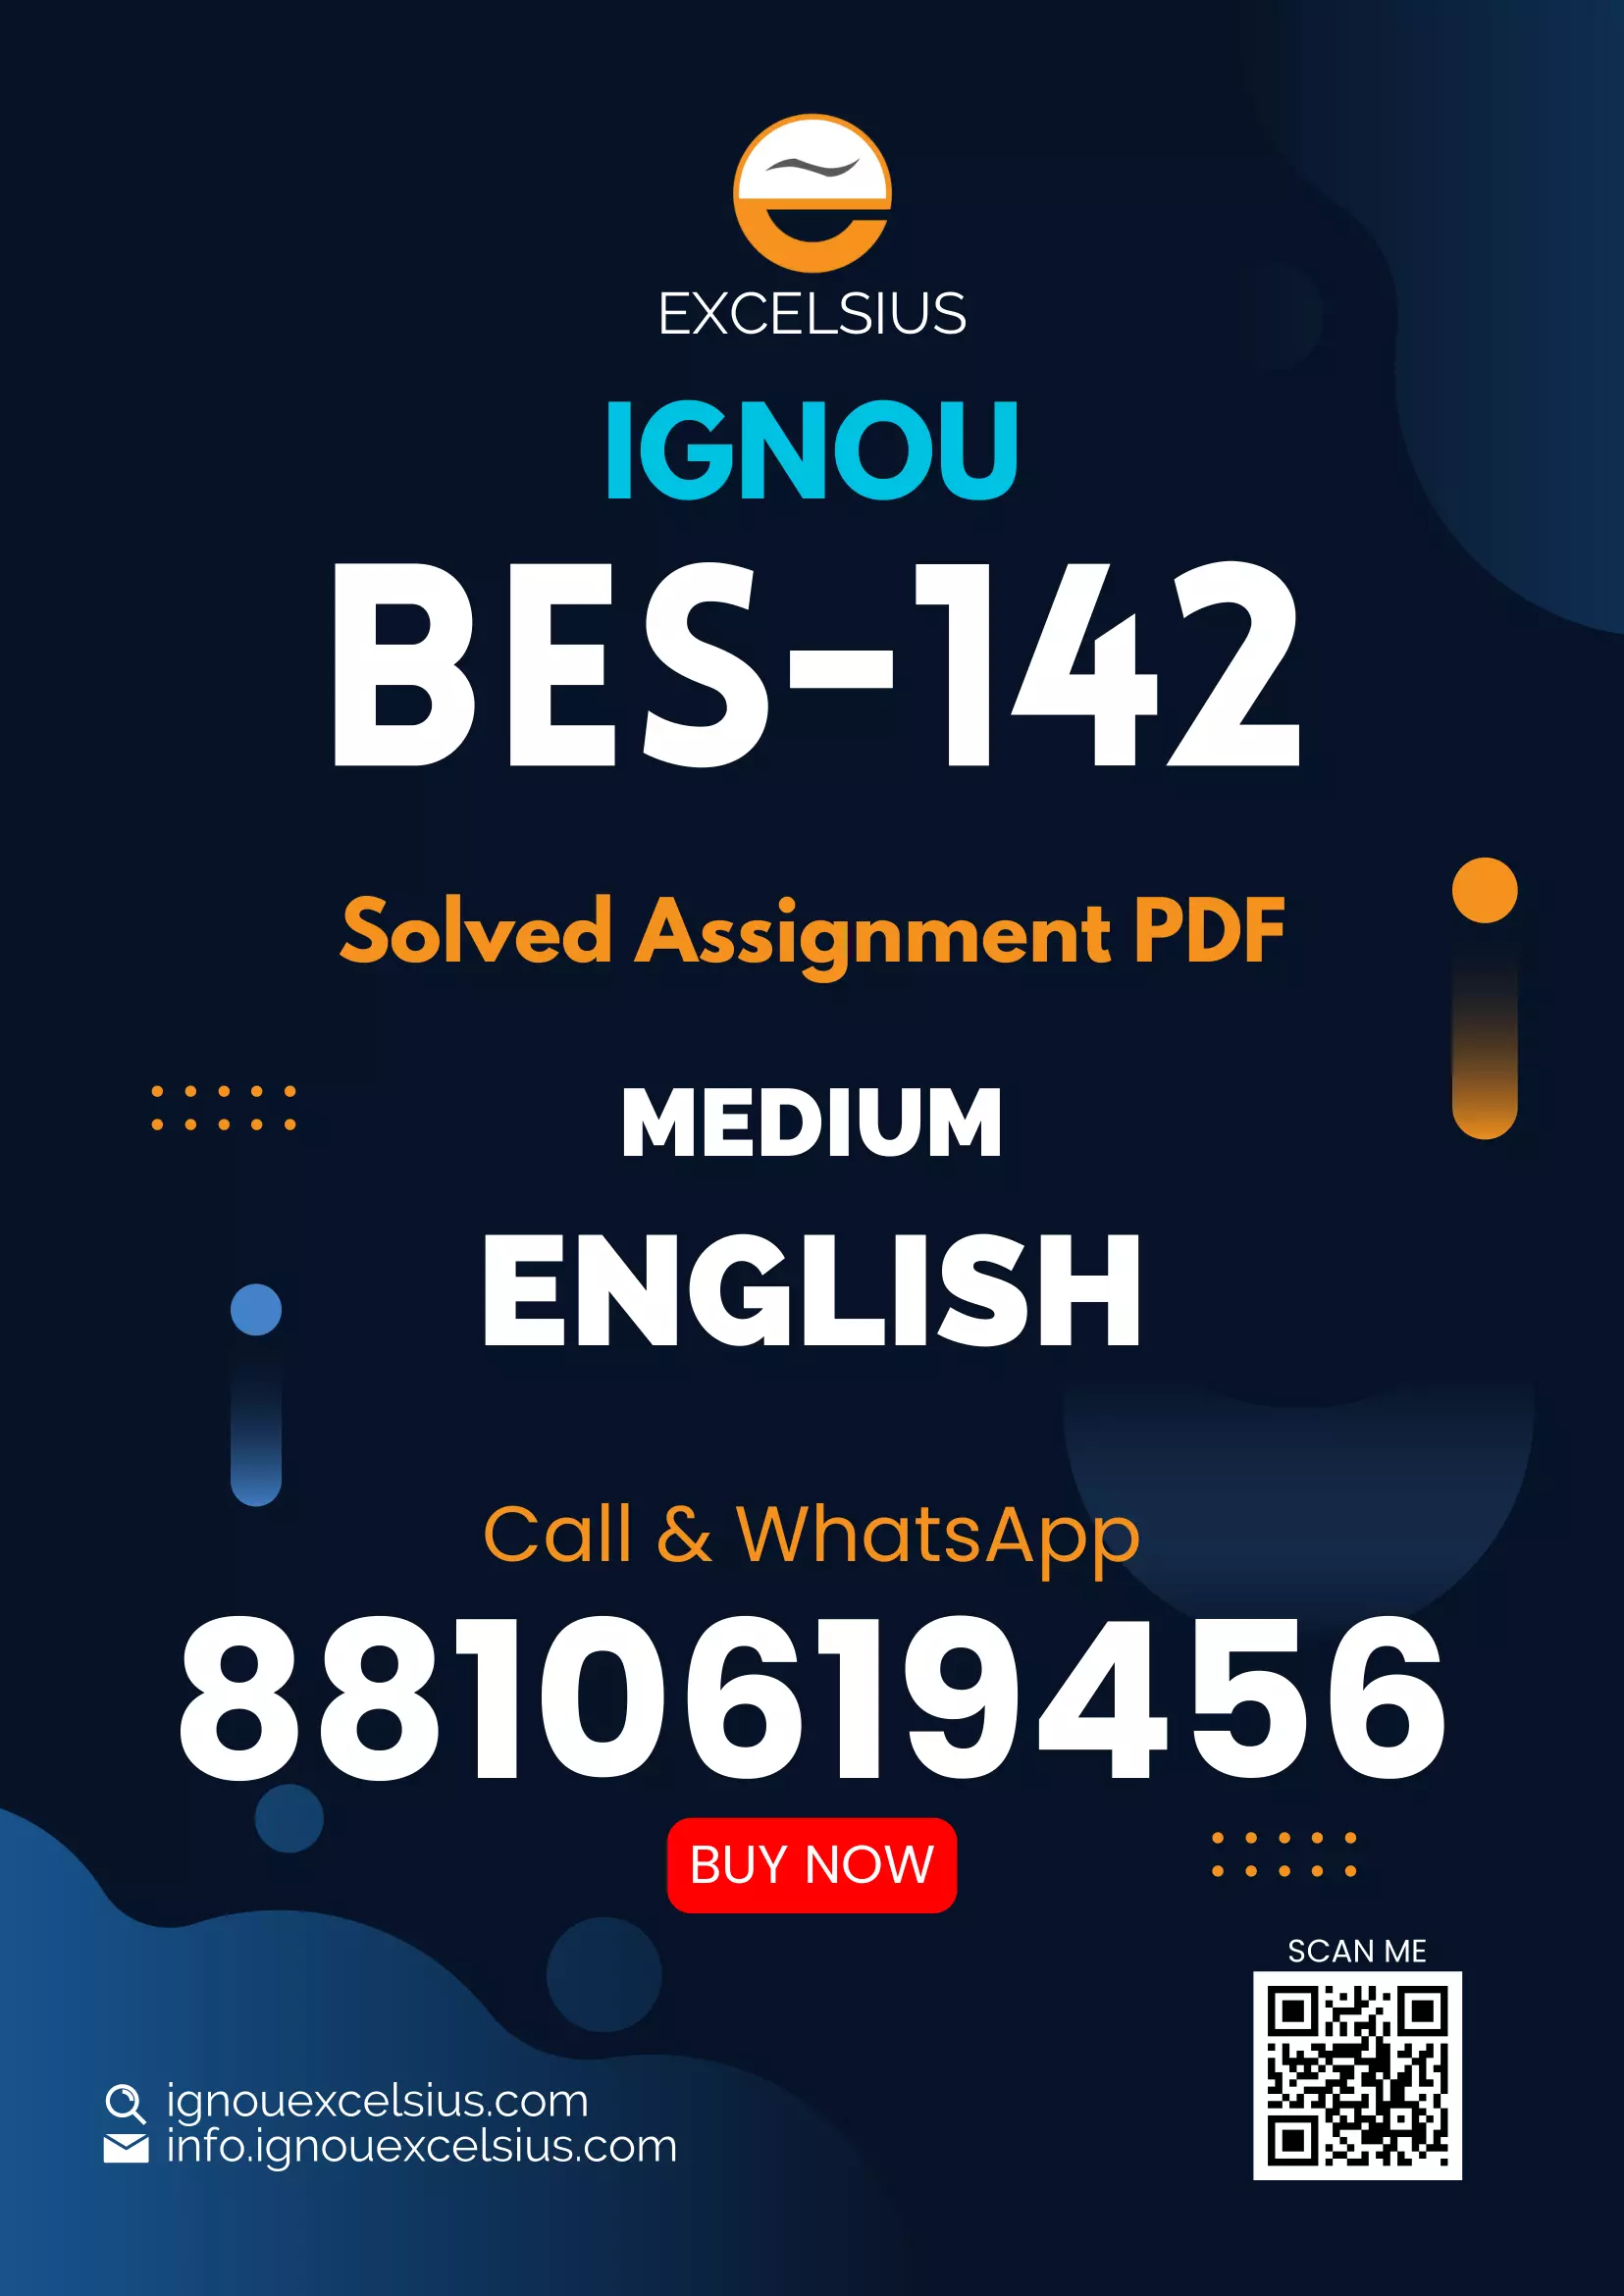 IGNOU BES-142 - Pedagogy of Science, Latest Solved Assignment-January 2022